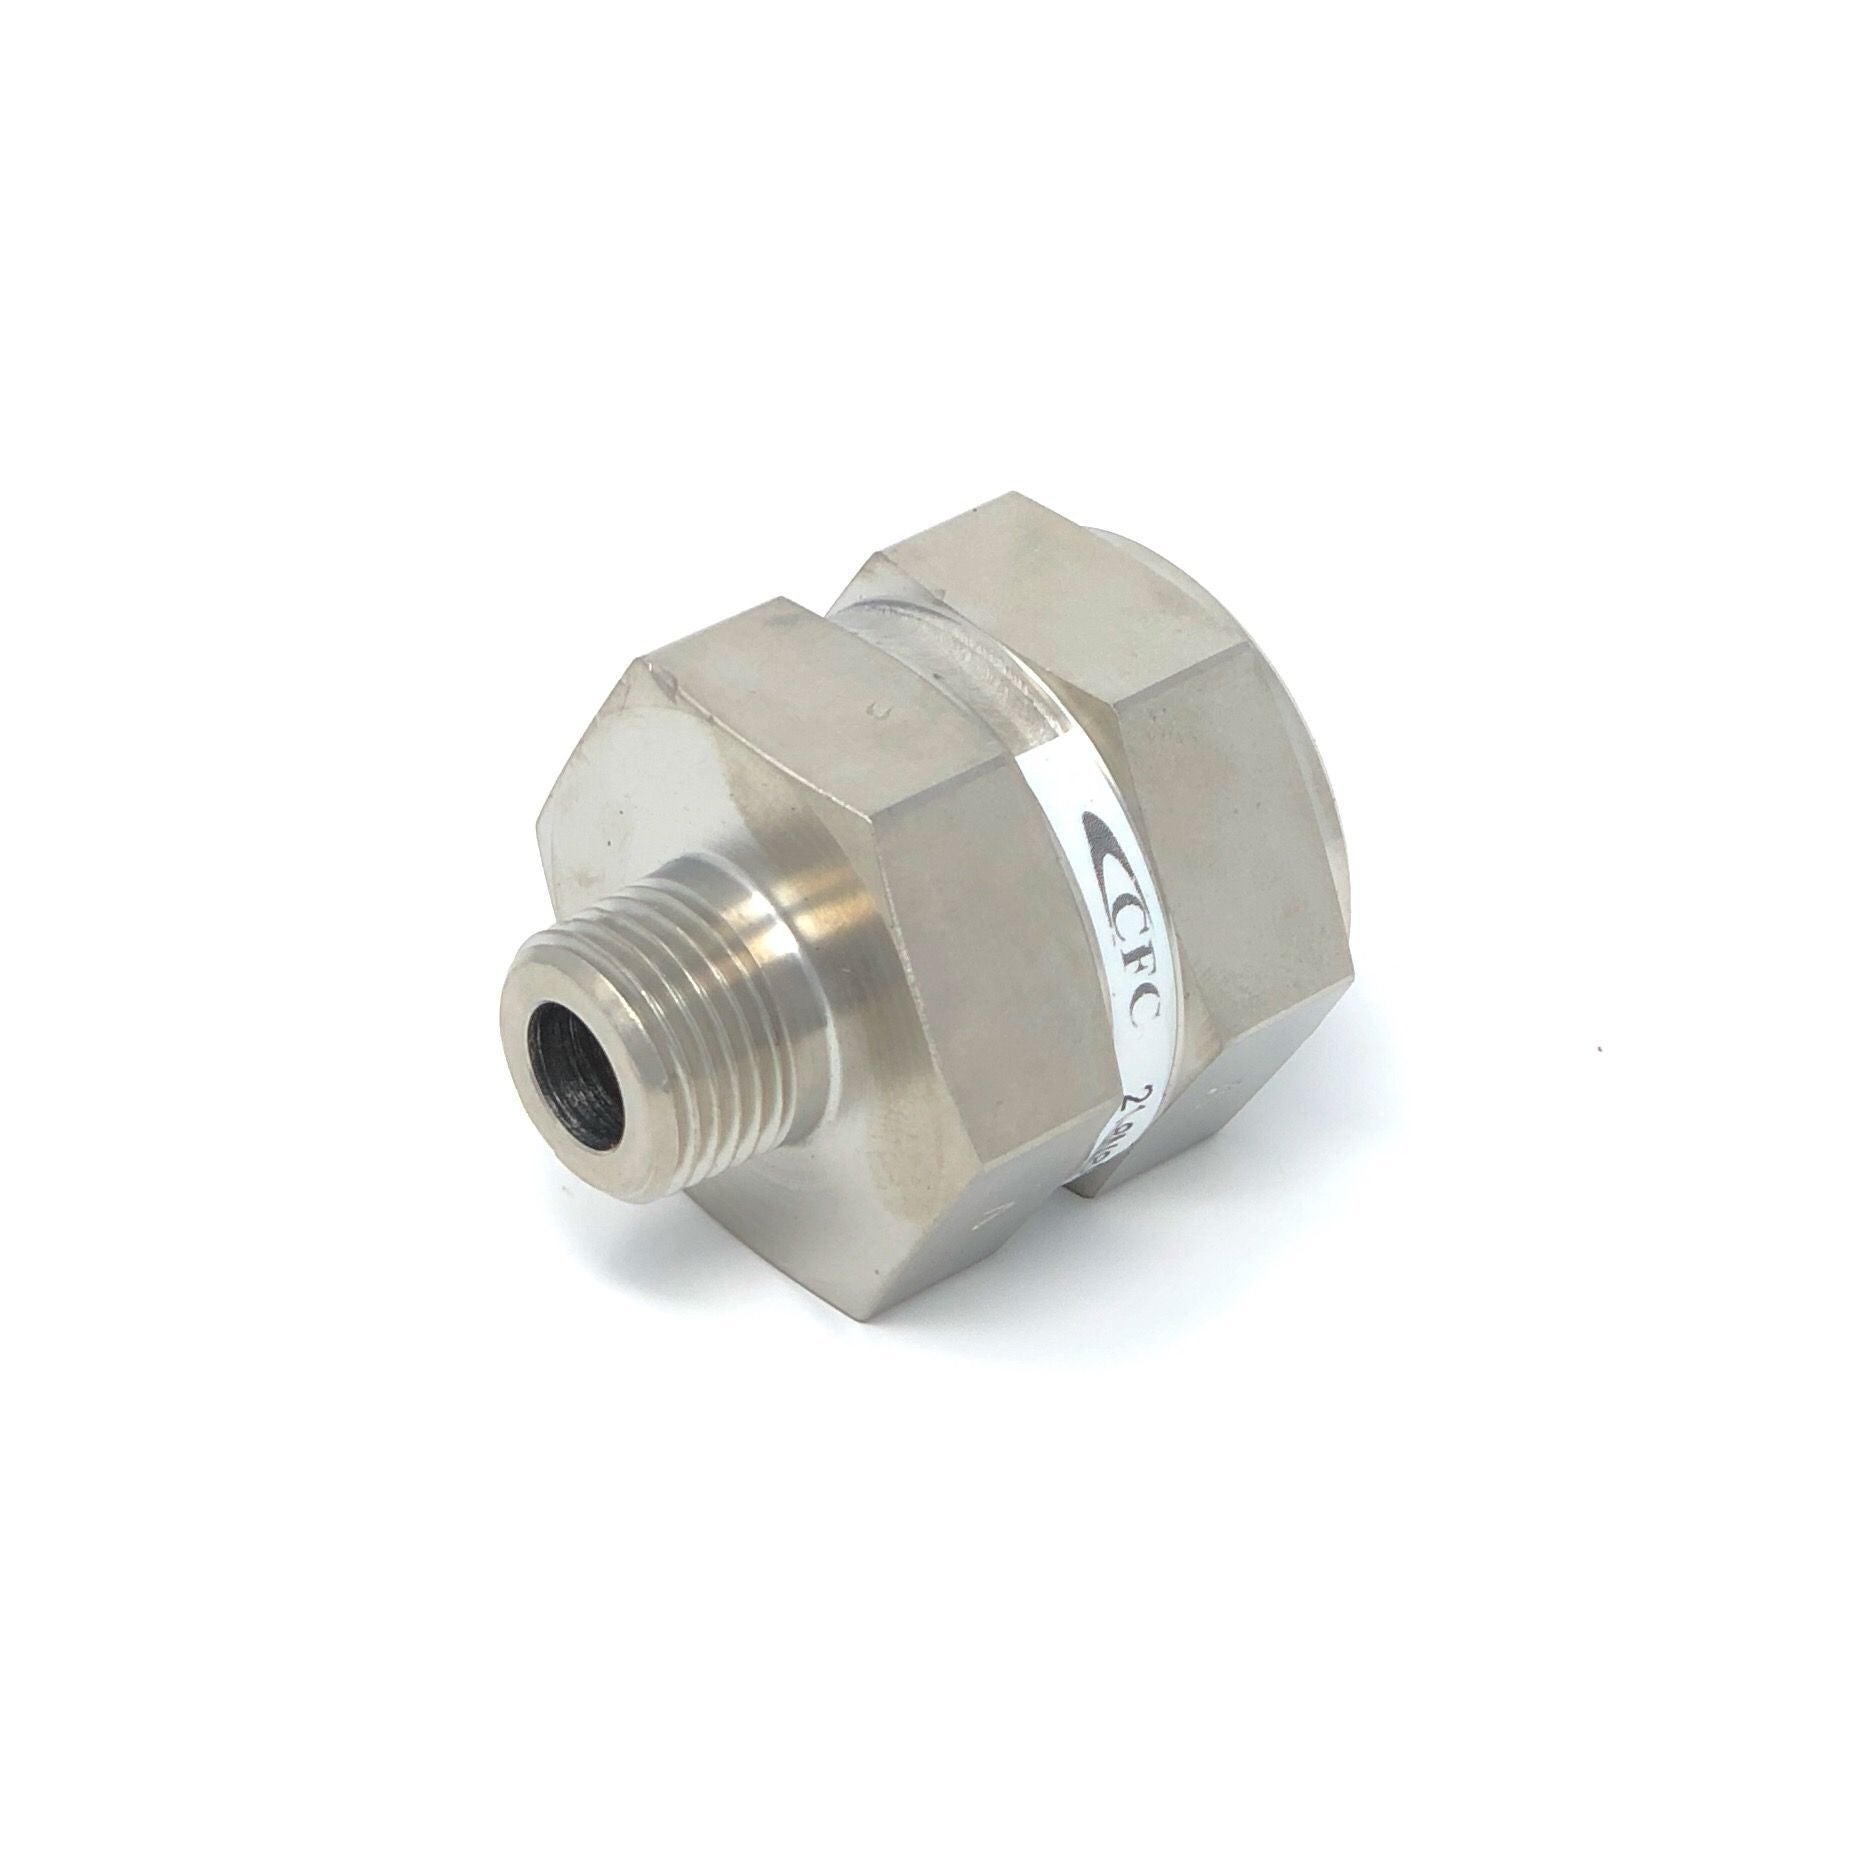 21-6S6S-40S : Chase High Pressure Inline Filter, 6000psi, #6 SAE (3/8") , 40 Micron, No Visual Indicator, No Bypass